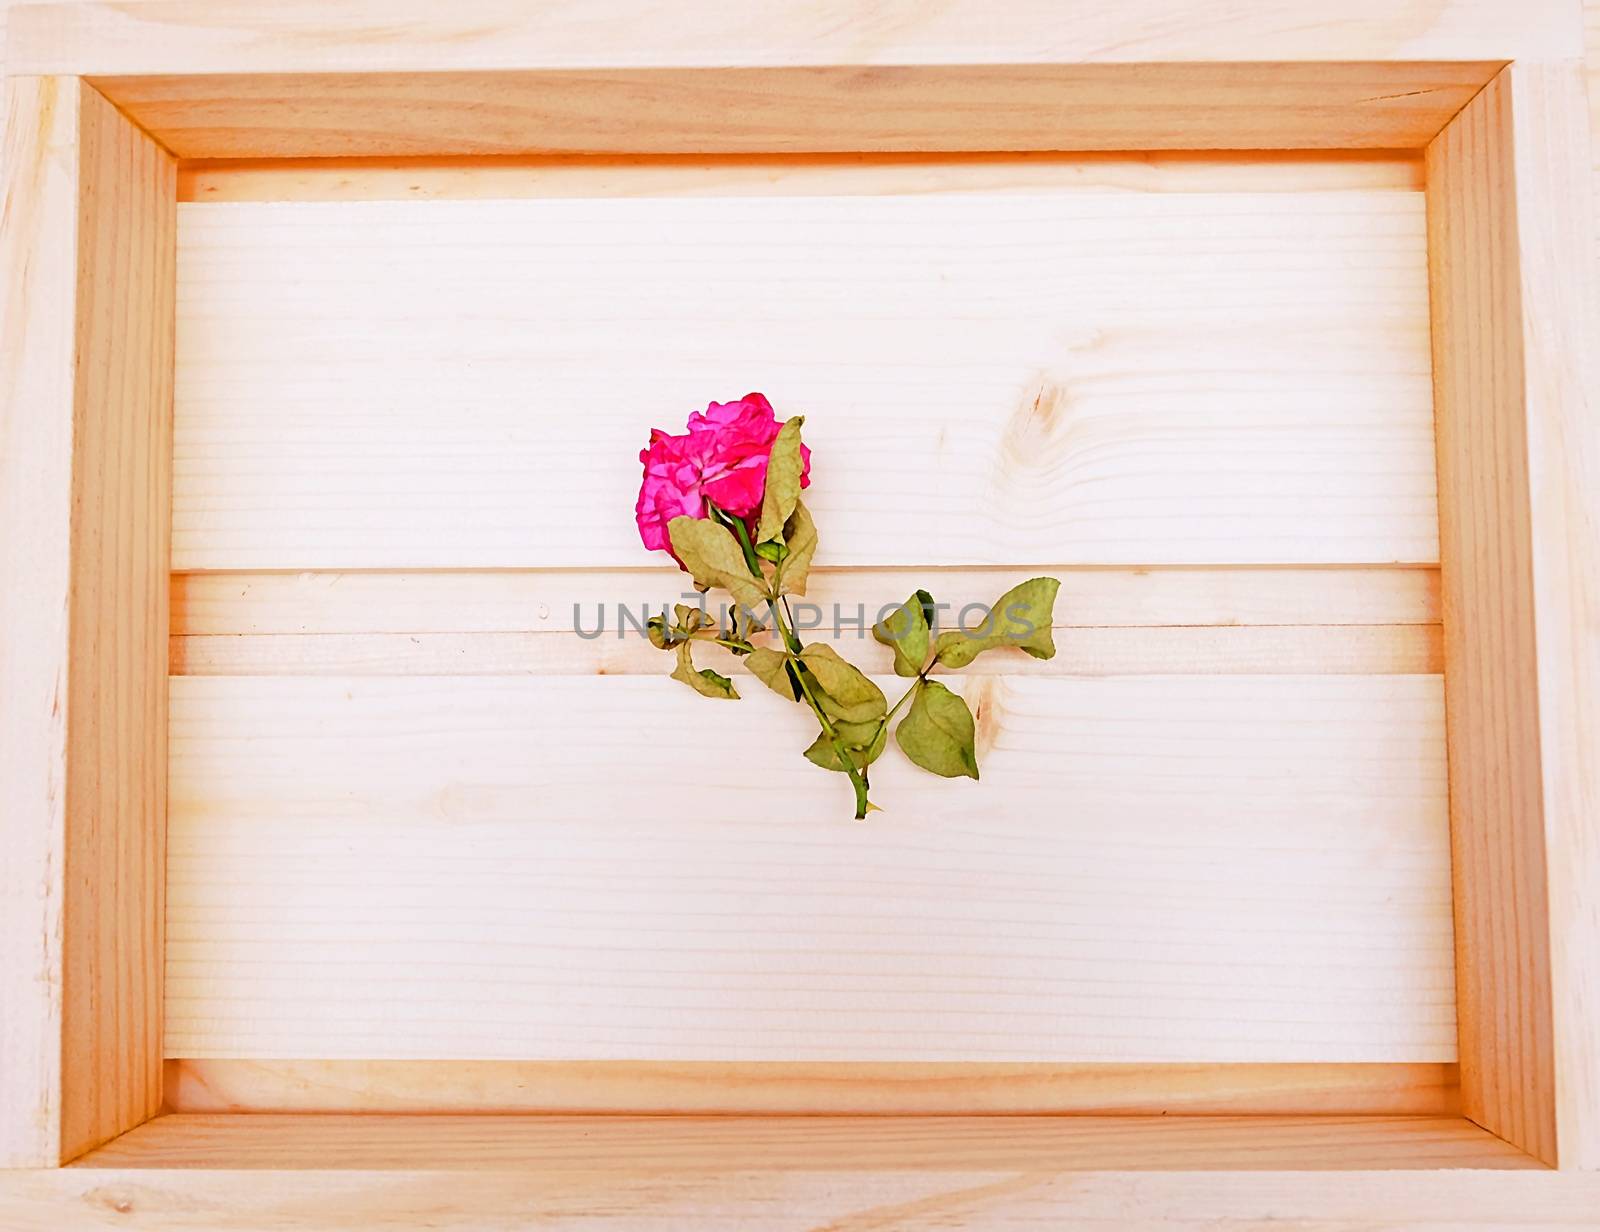 Chubby Pink Rose Flower in Wooden Box by aonip